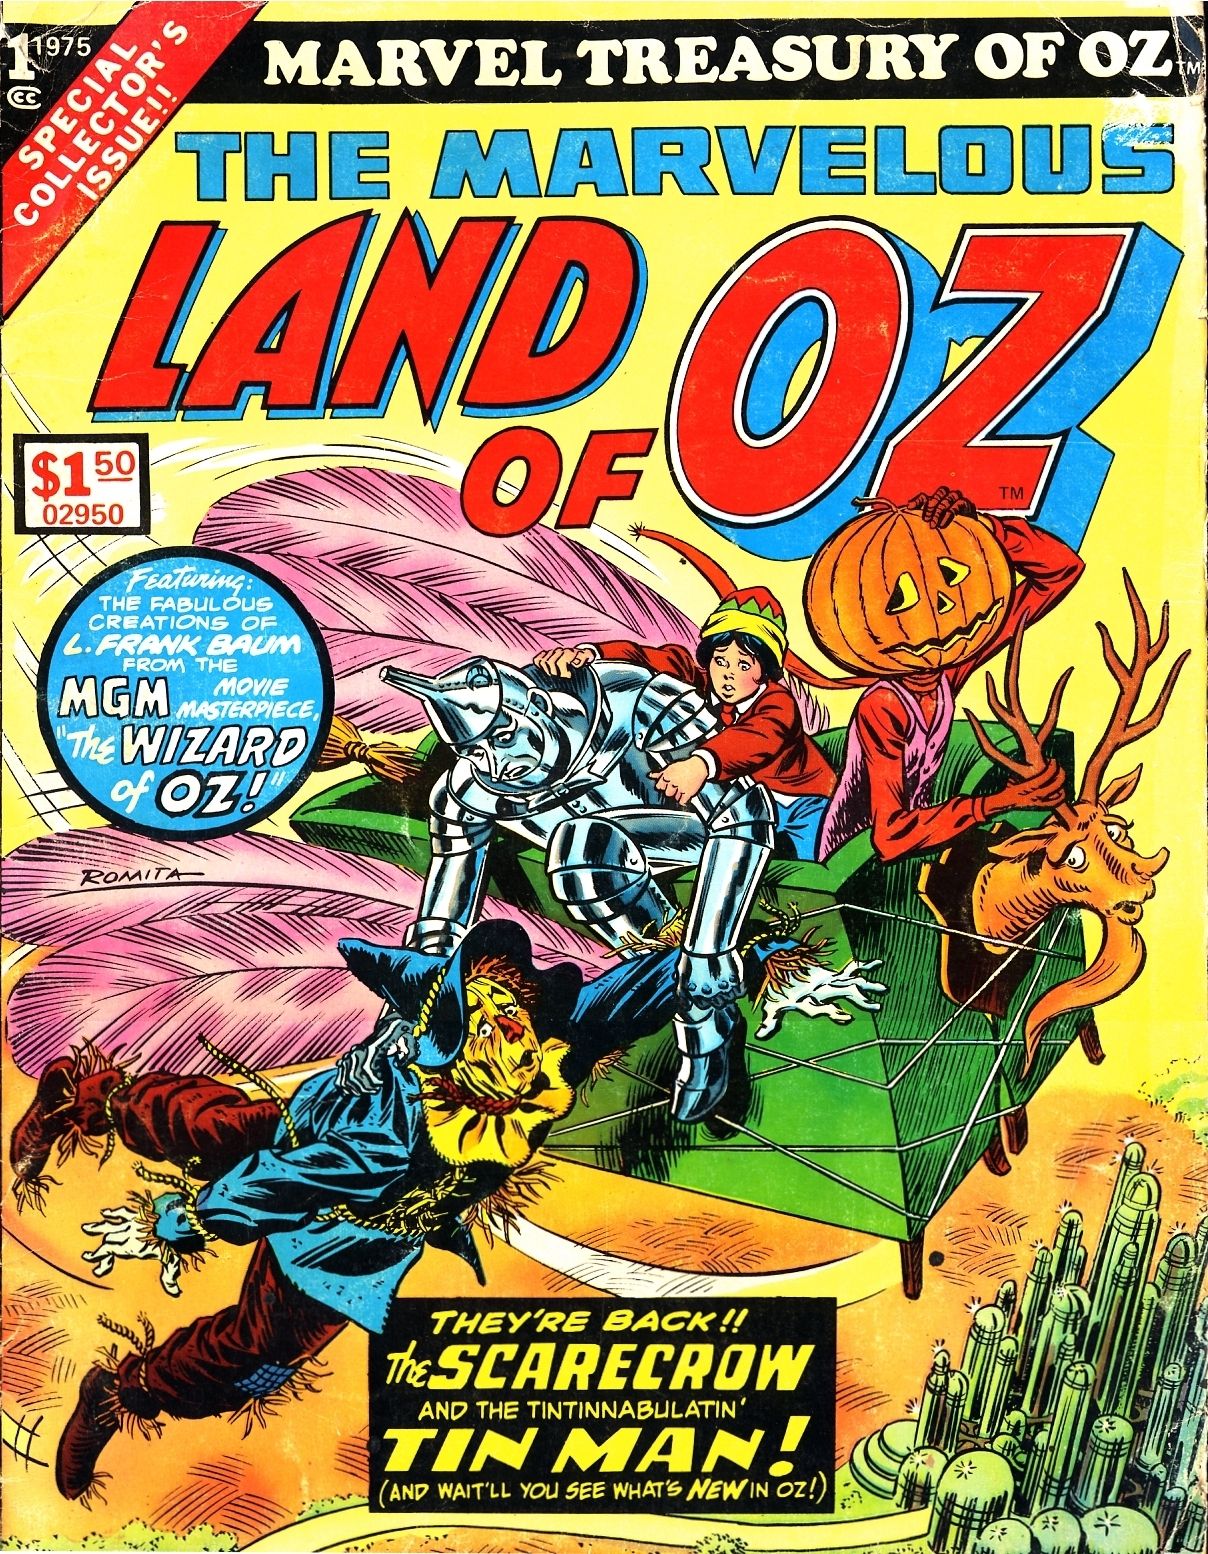 Marvel Treasury of Oz featuring the Marvelous Land of Oz Full Page 1